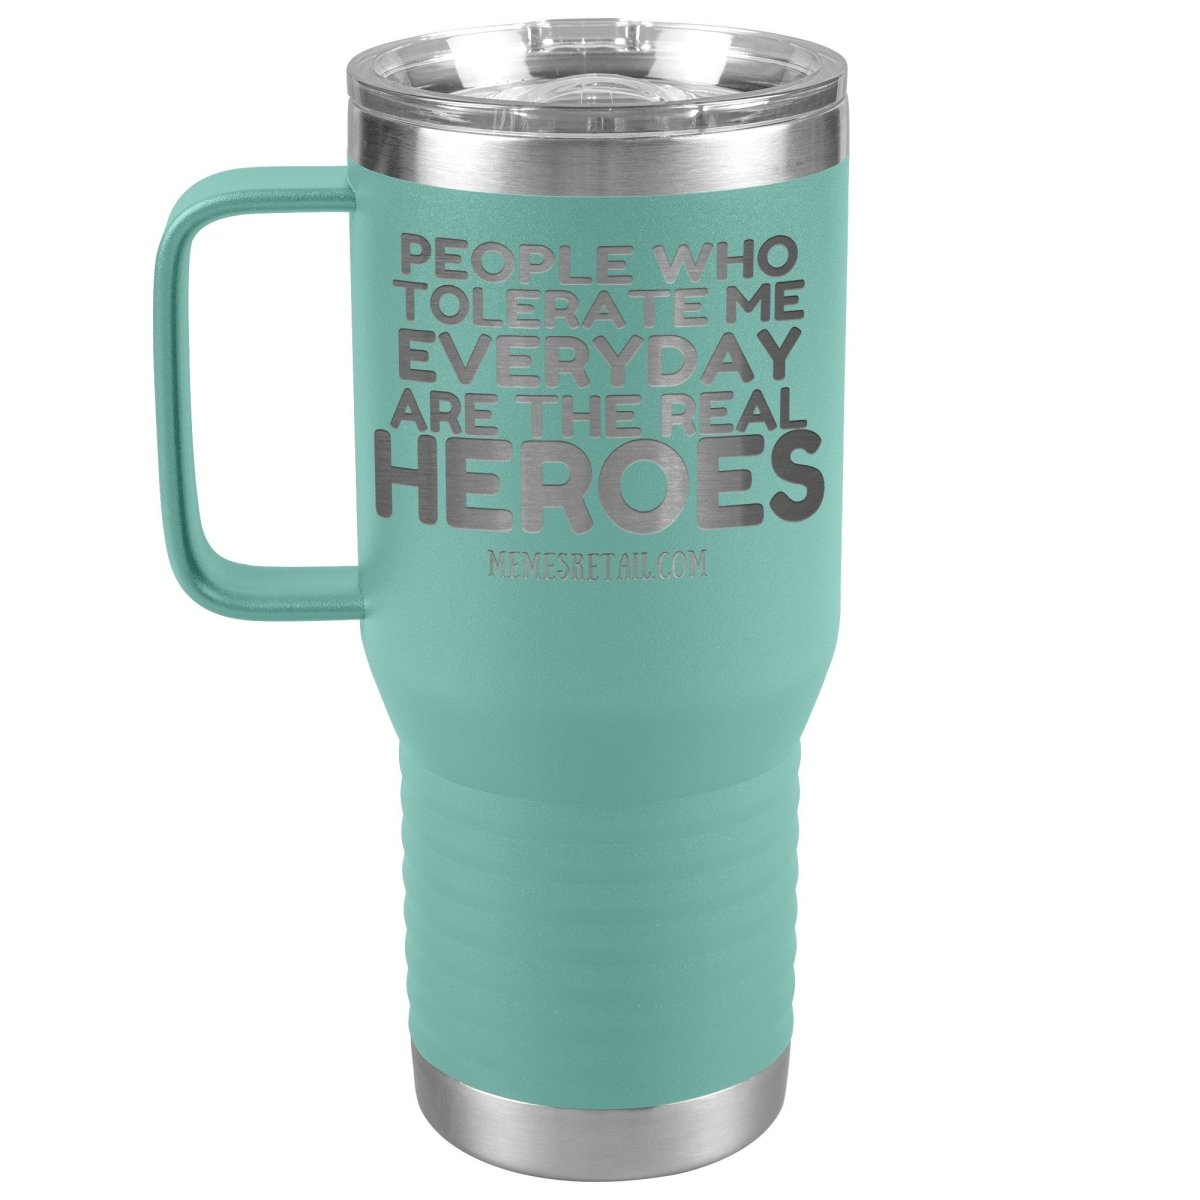 People Who Tolerate Me Everyday Are The Real Heroes Tumblers, 20oz Travel Tumbler / Teal - MemesRetail.com